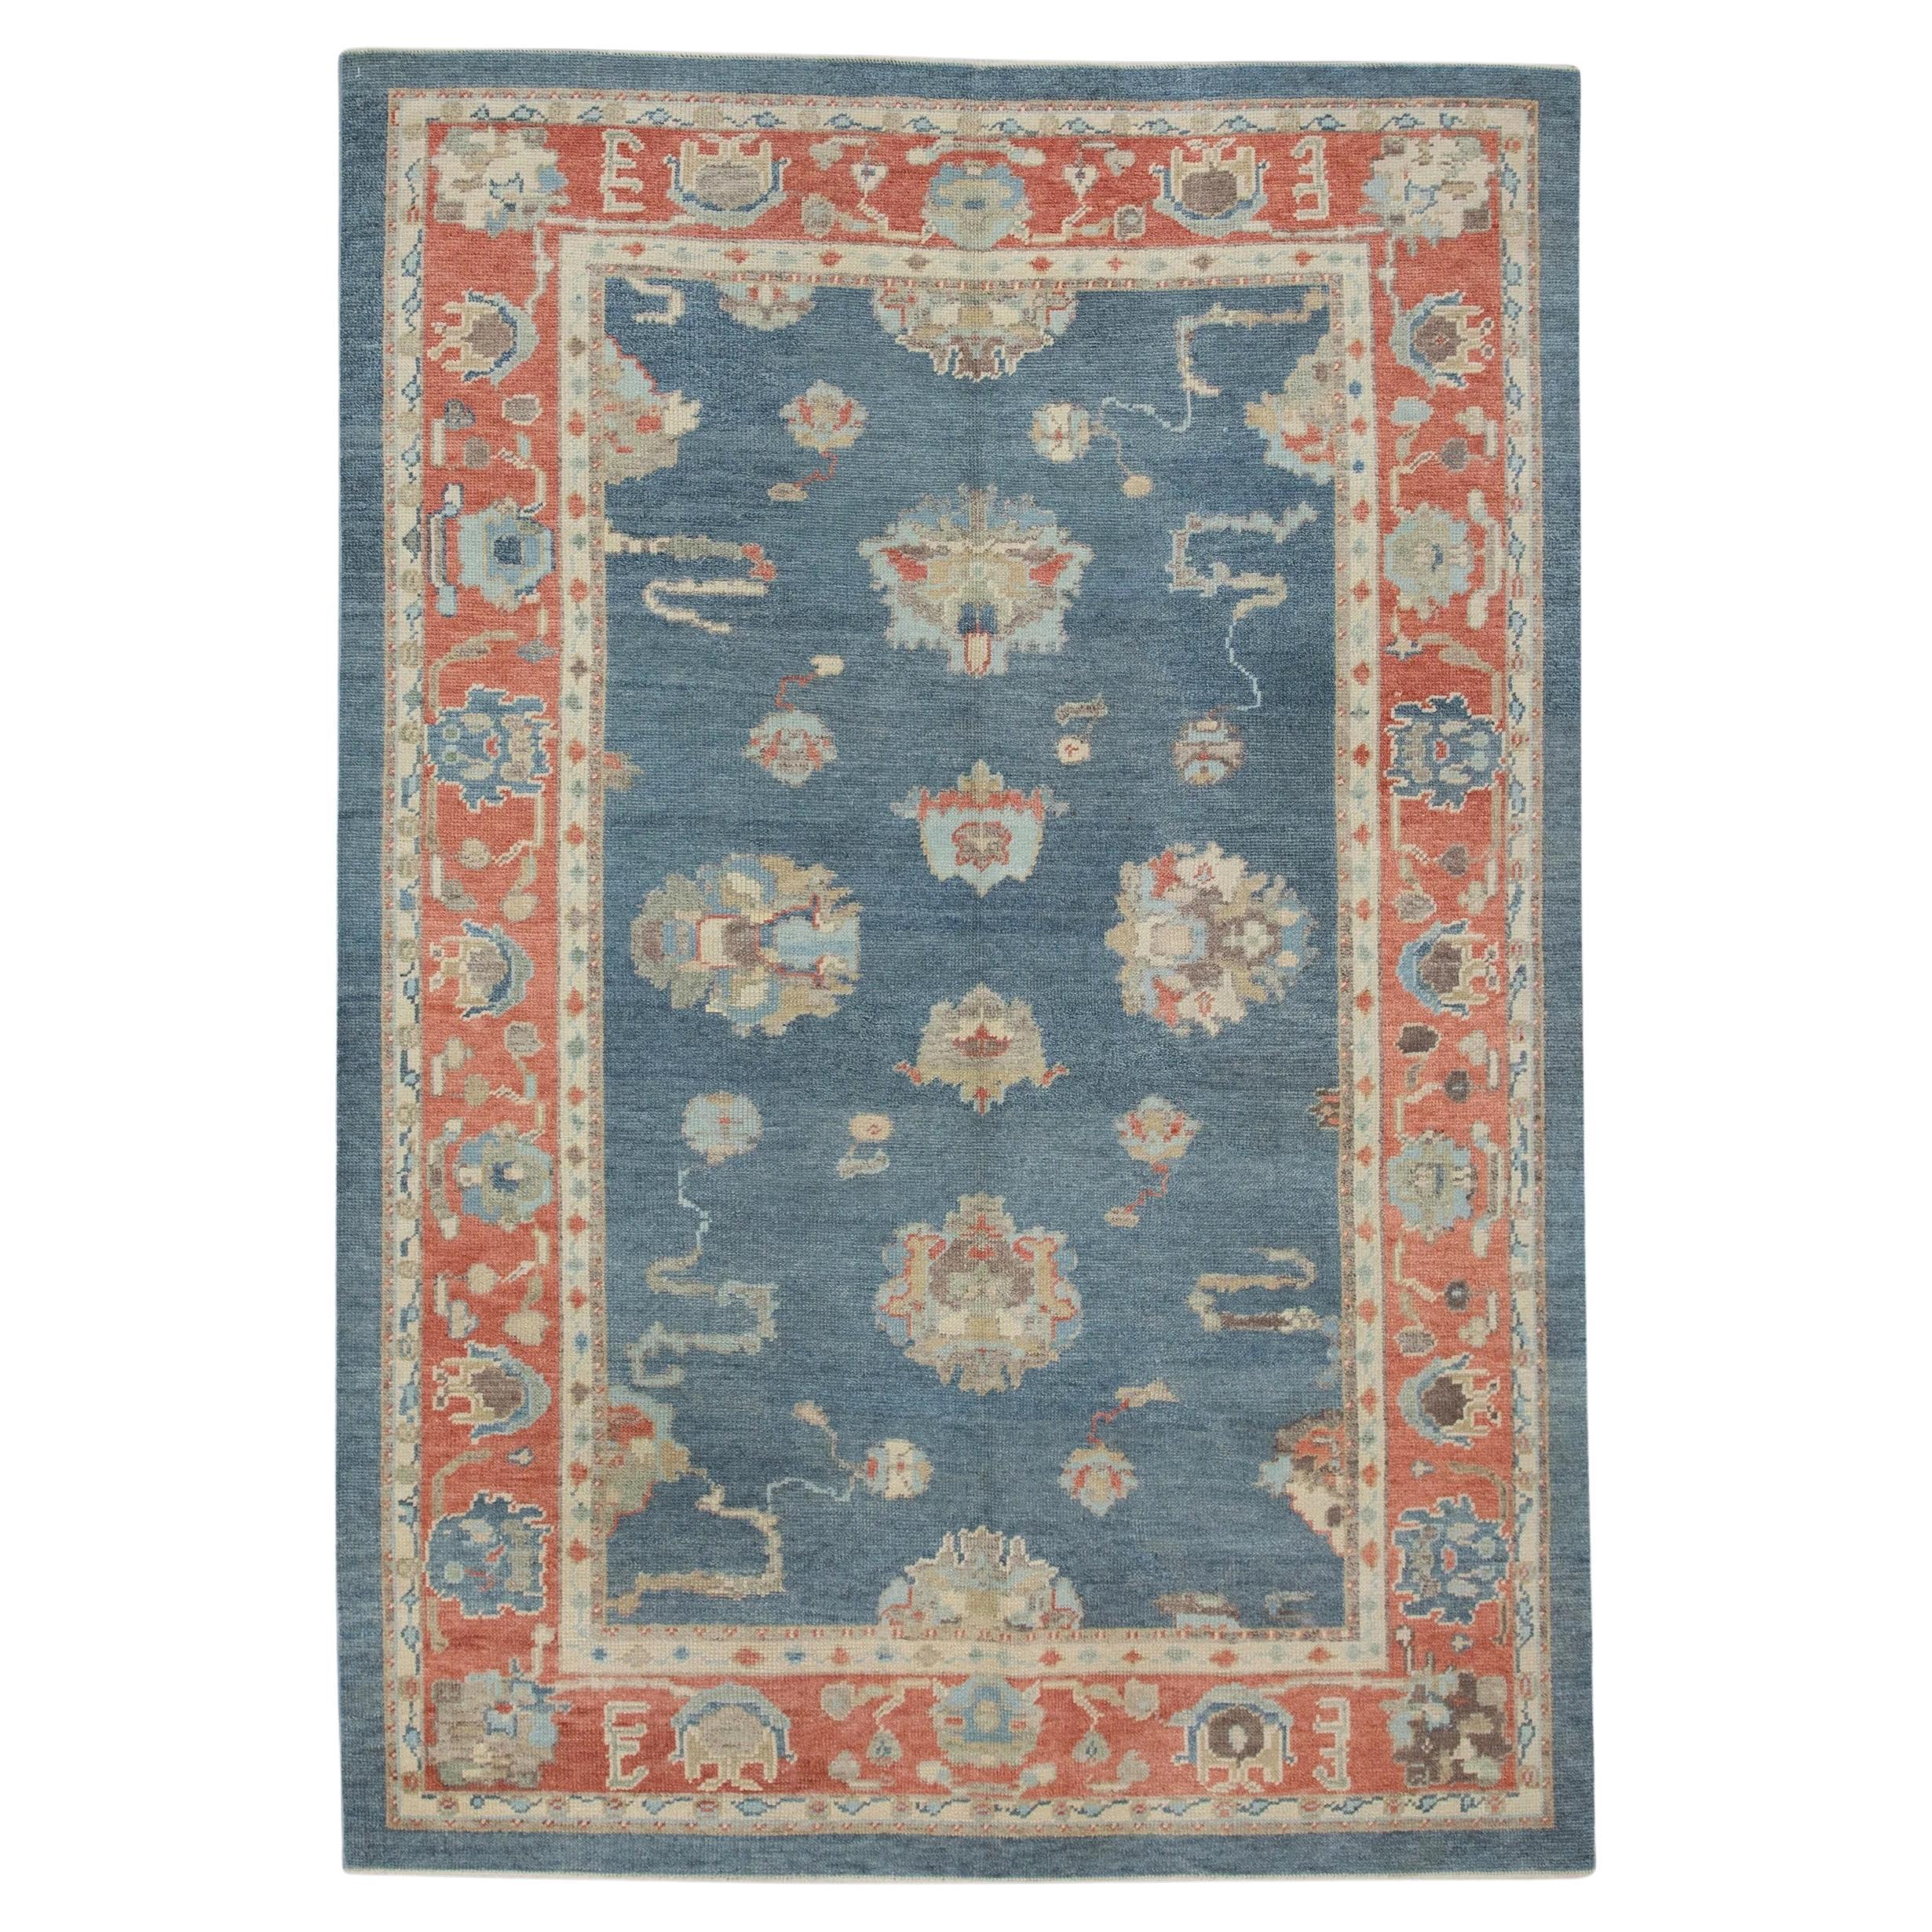 Red and Blue Floral Handwoven Wool Turkish Oushak Rug 6' x 8'6"